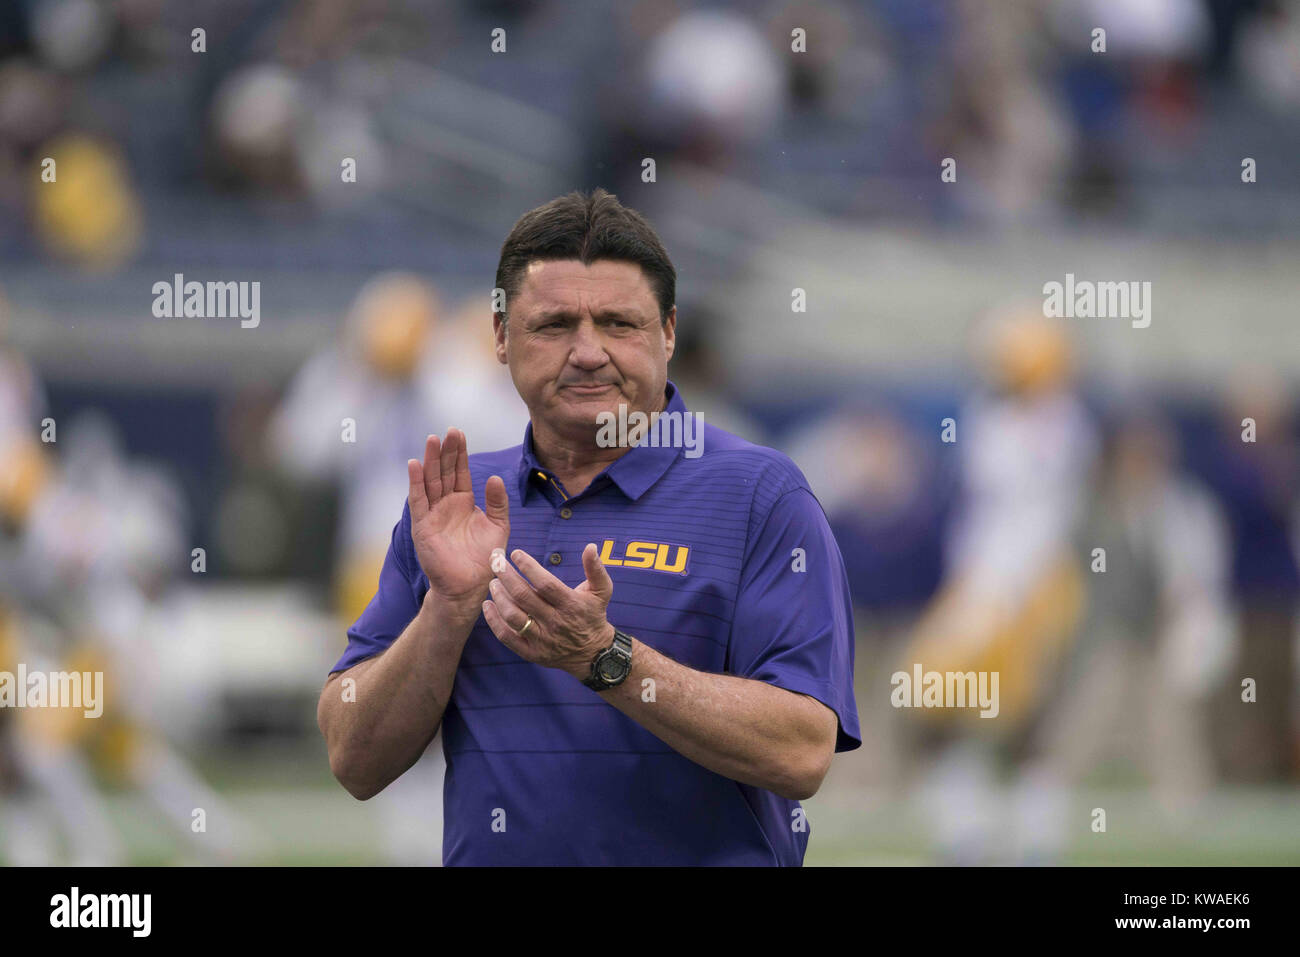 Love for football: How Ed Orgeron's son, Cody, left tennis behind and  became McNeese State's starting QB, LSU